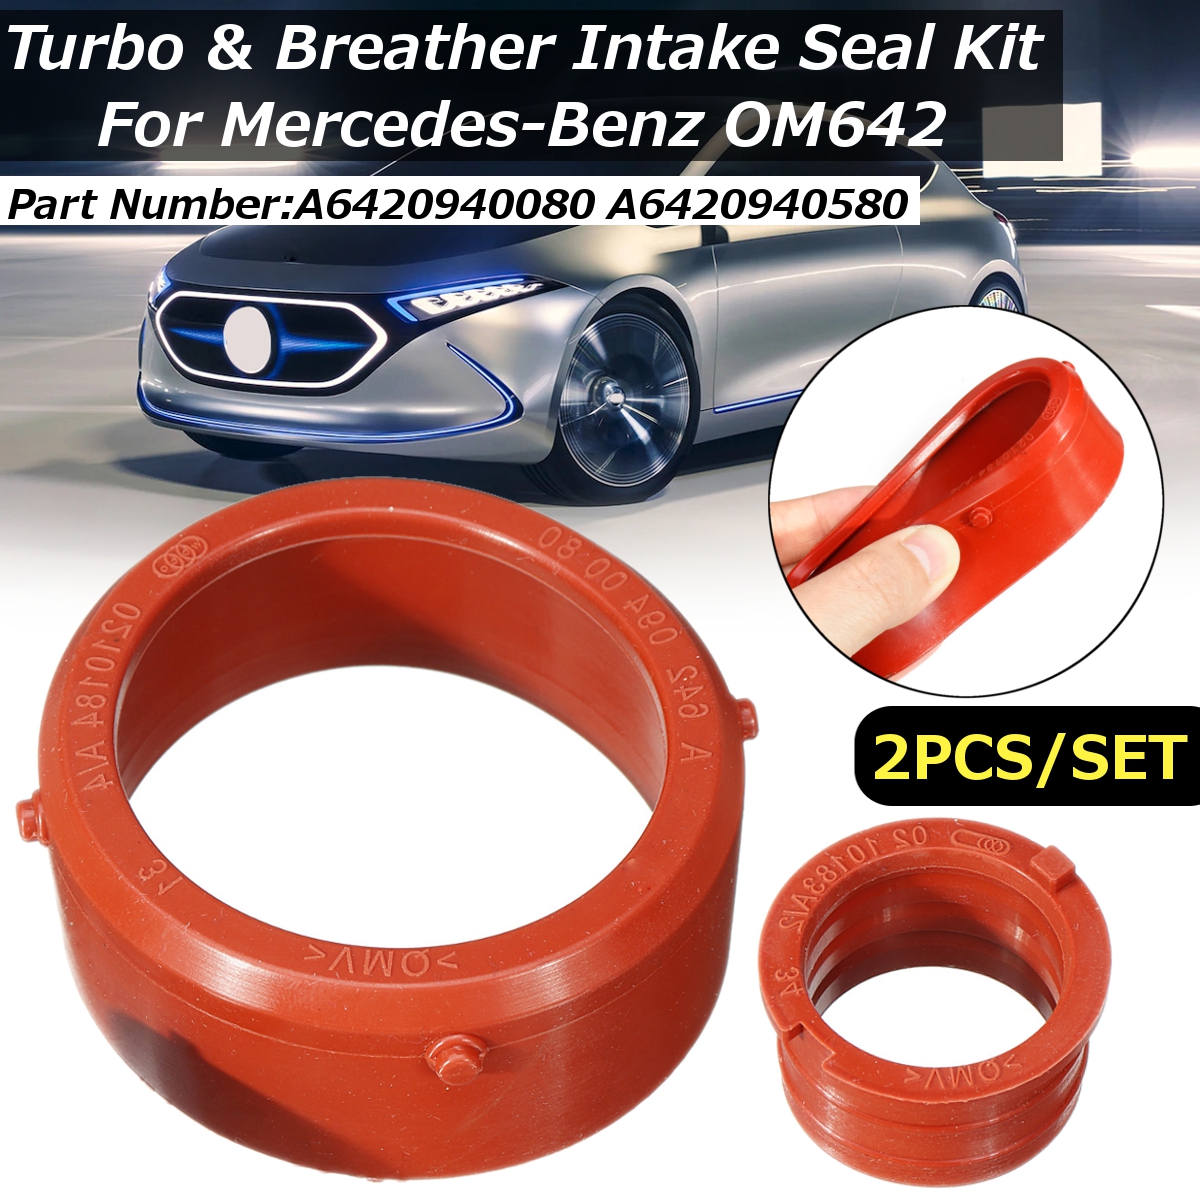 2pcs-Red-Turbo--Breather-Intake-Seal-Kit-For-Mercedes-Benz-OM642-A6420940080-A6420940580-1747599-2